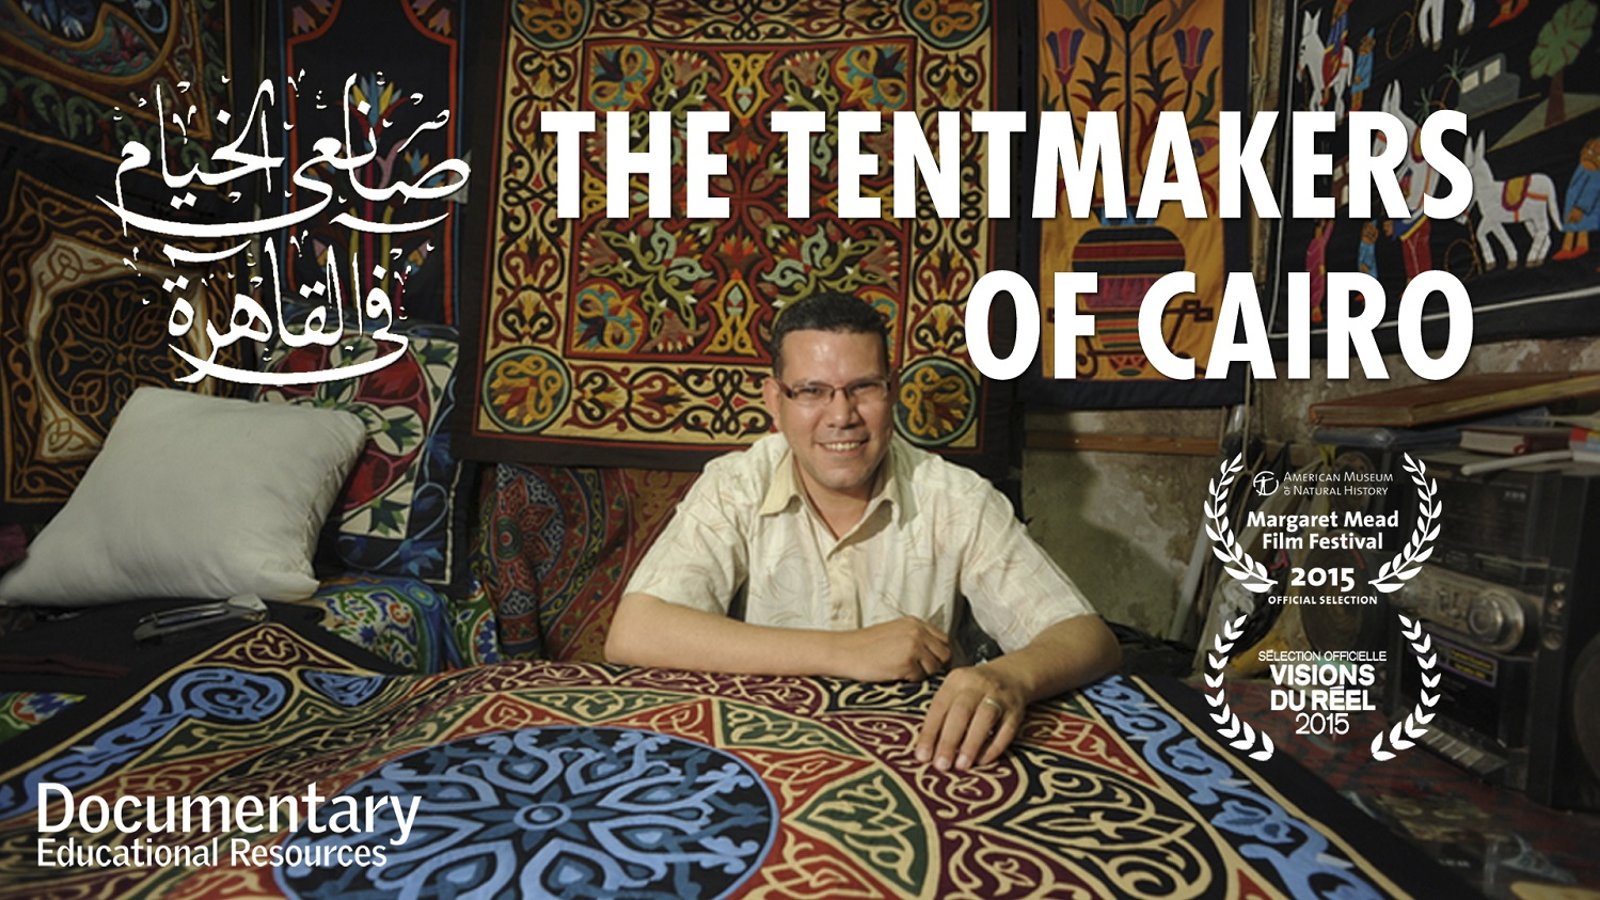 The Tentmakers of Cairo